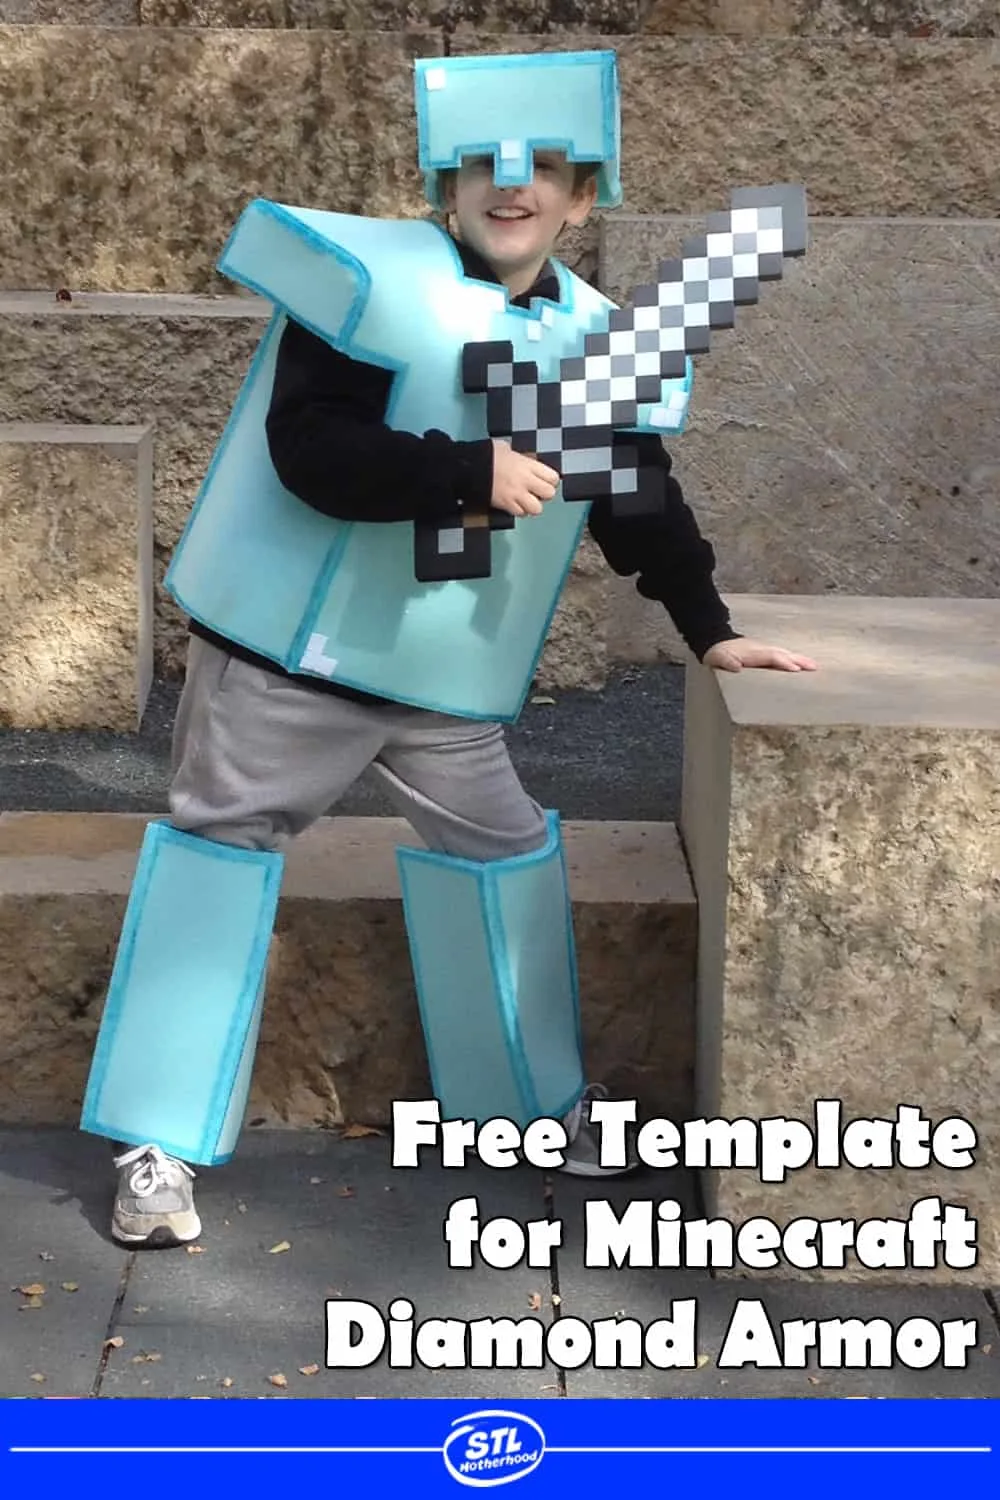 Make the best Halloween costume EVER this year! Be a Minecraft player in full diamond armor...made from foam!
#Minecraft #Halloween